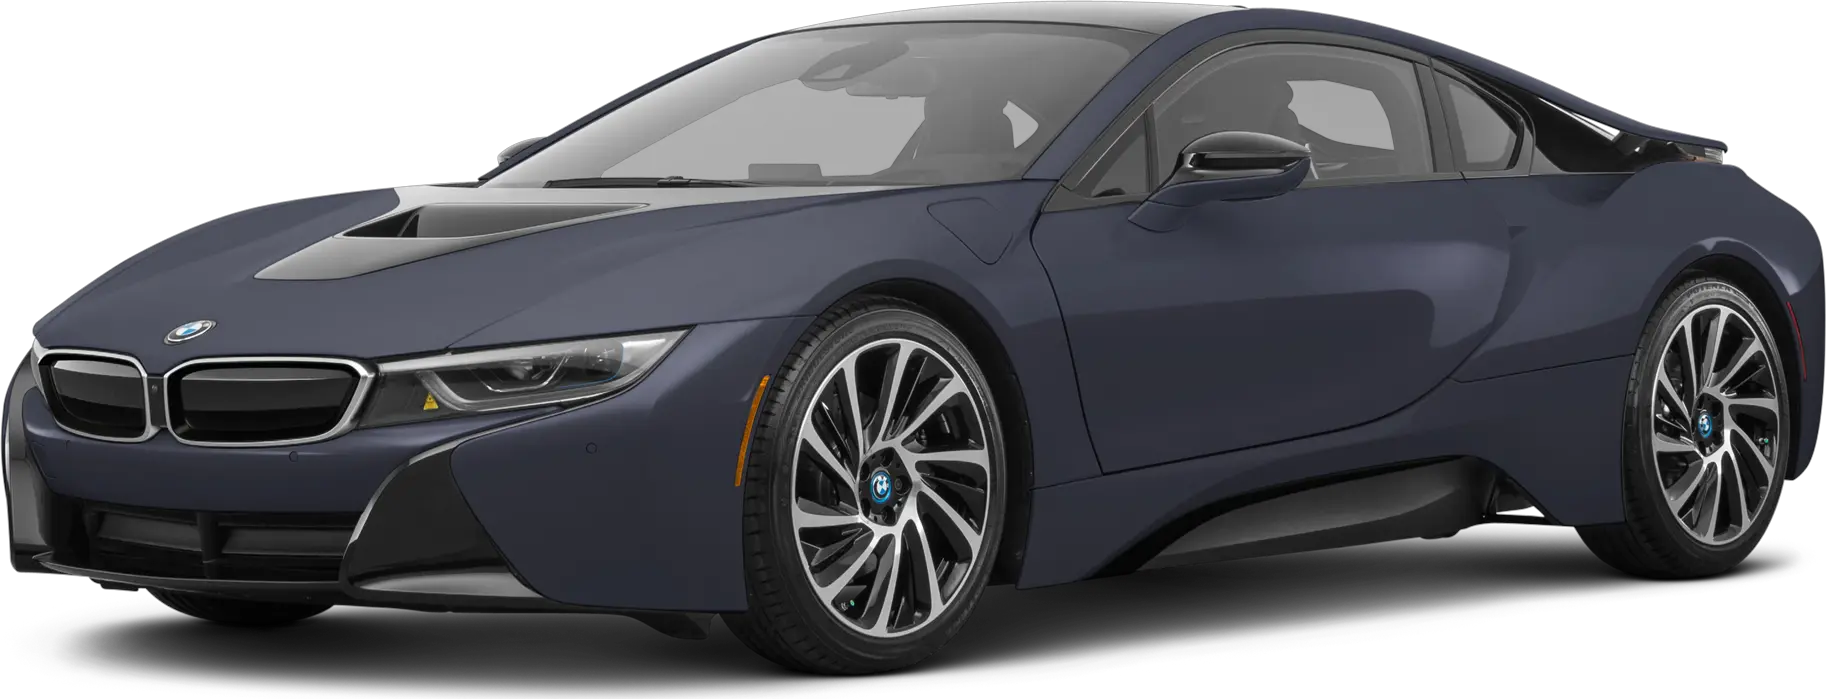 2020 Bmw I8 Prices Reviews Bmw I8 Price Black Png Bmw I8 Png